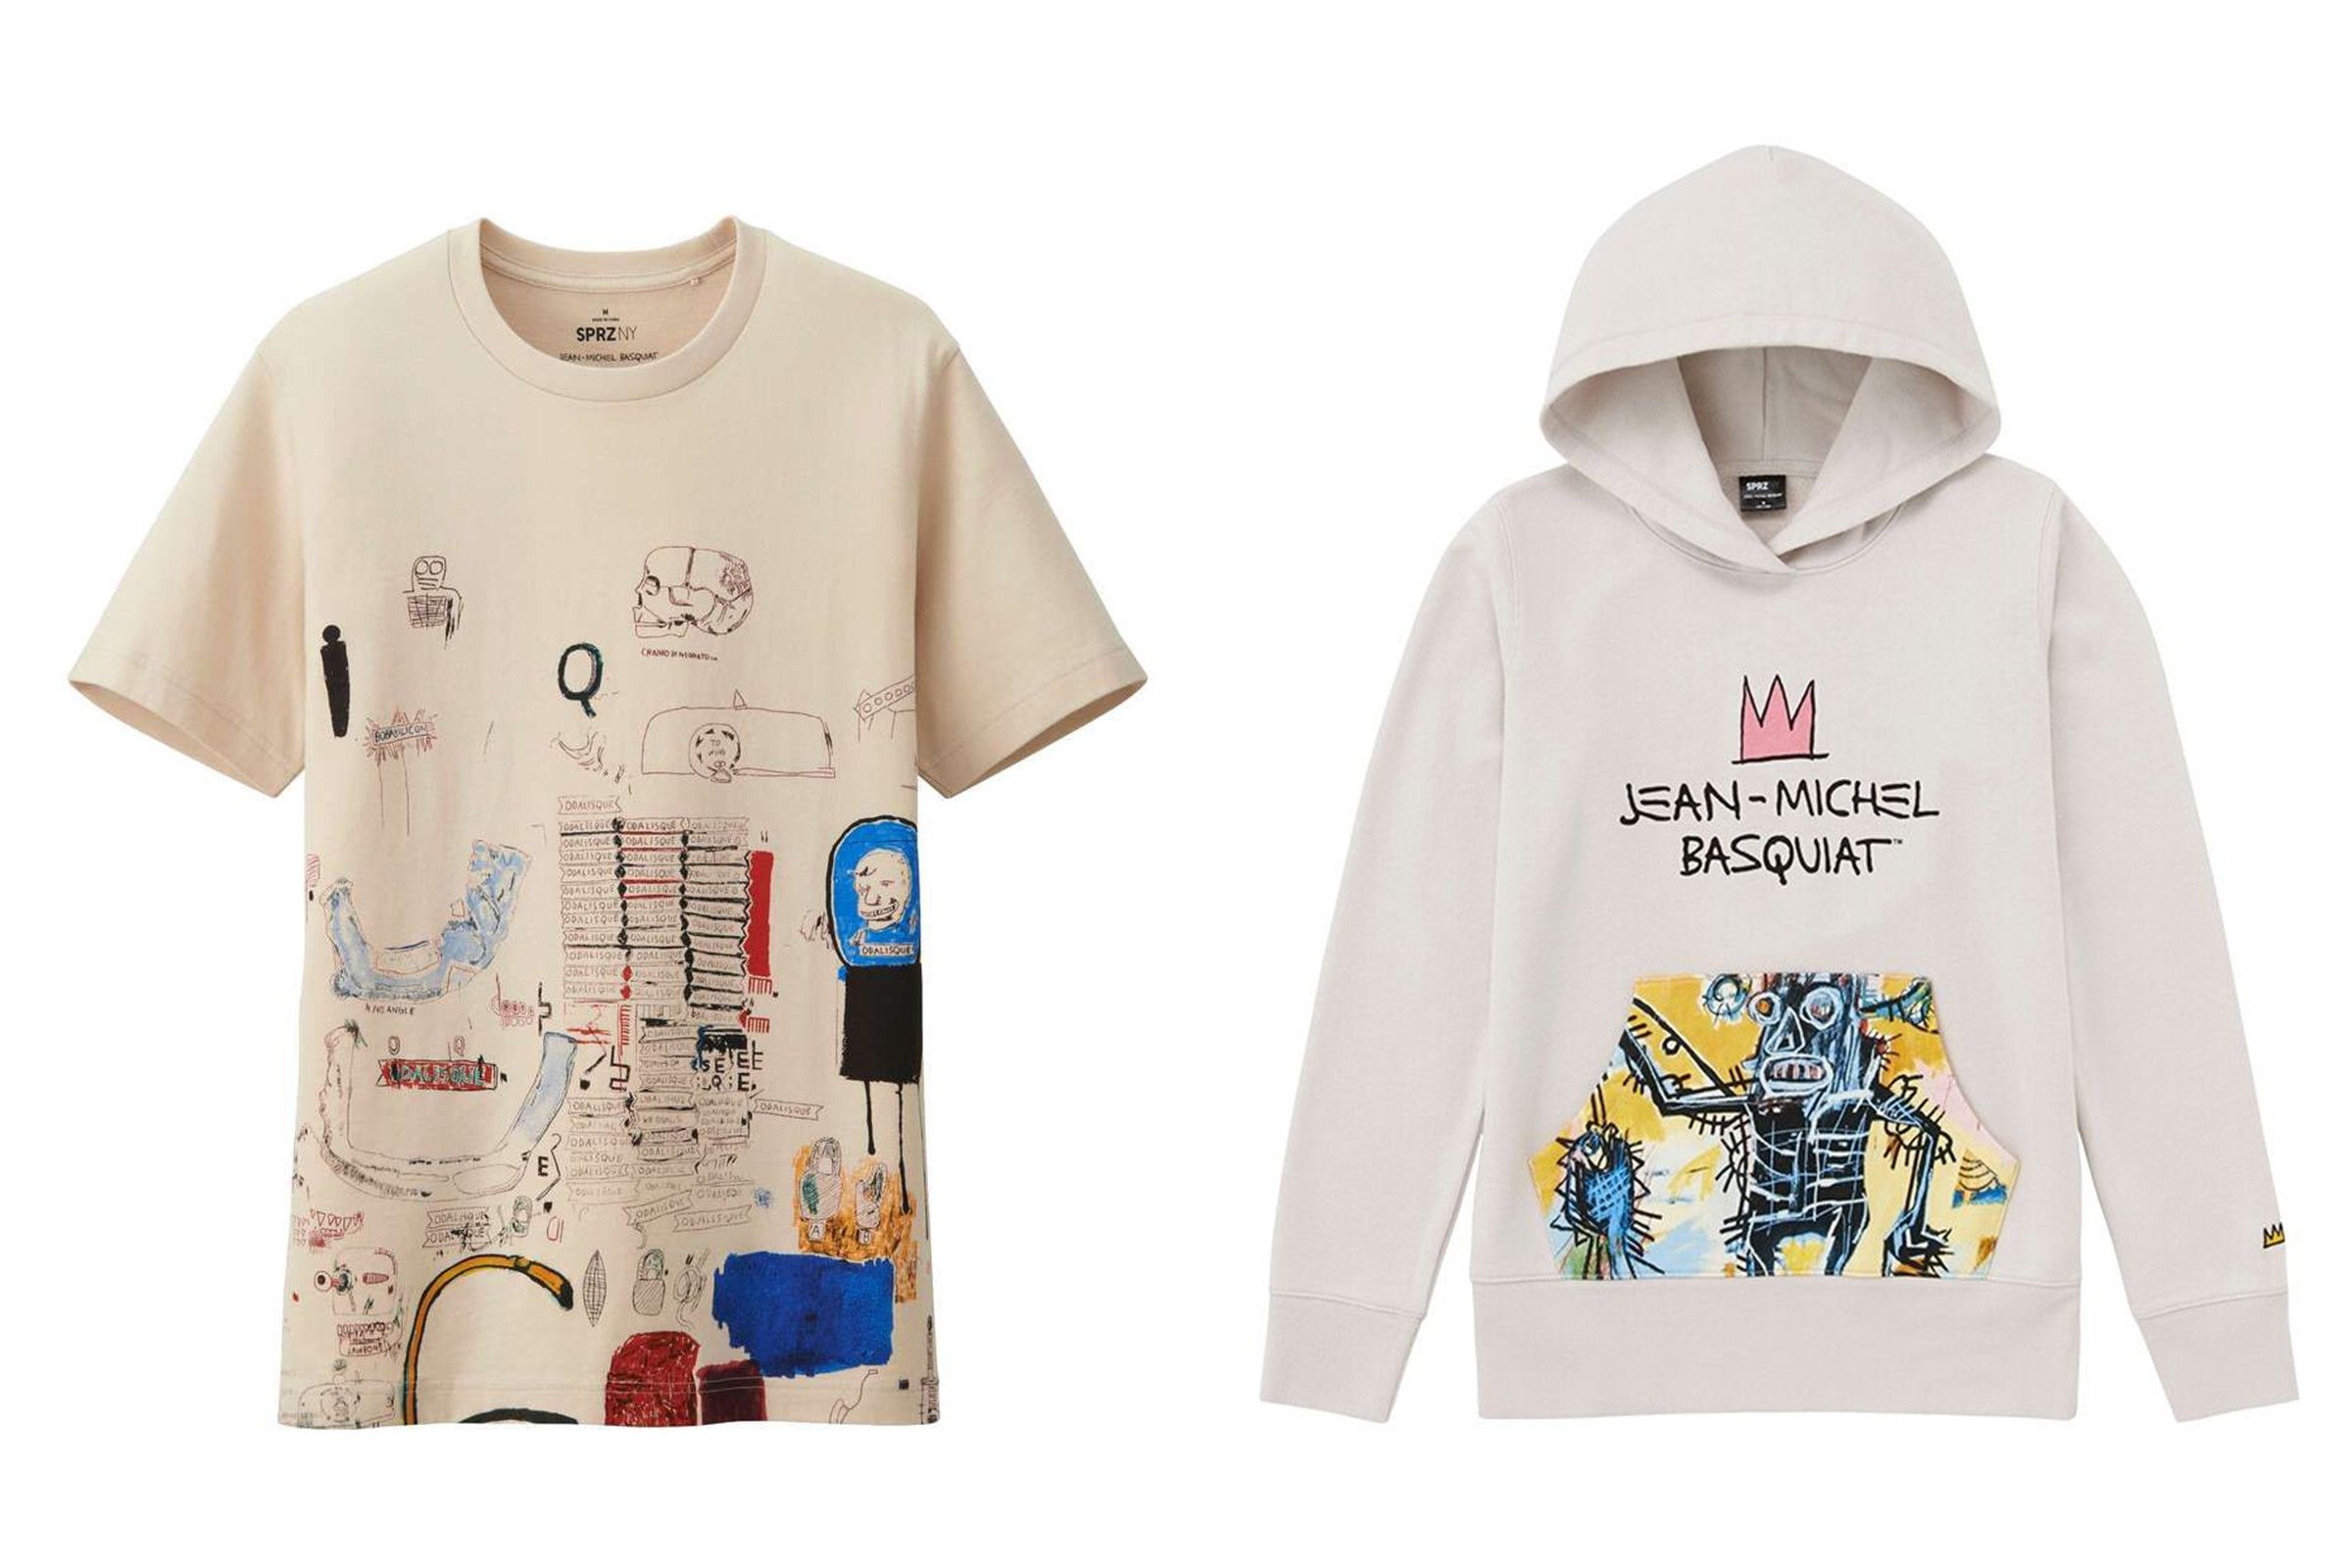 Uniqlo SPRZ NY x Estate of Jean-Michel Basquiat Spring 2014 (ONGOING)